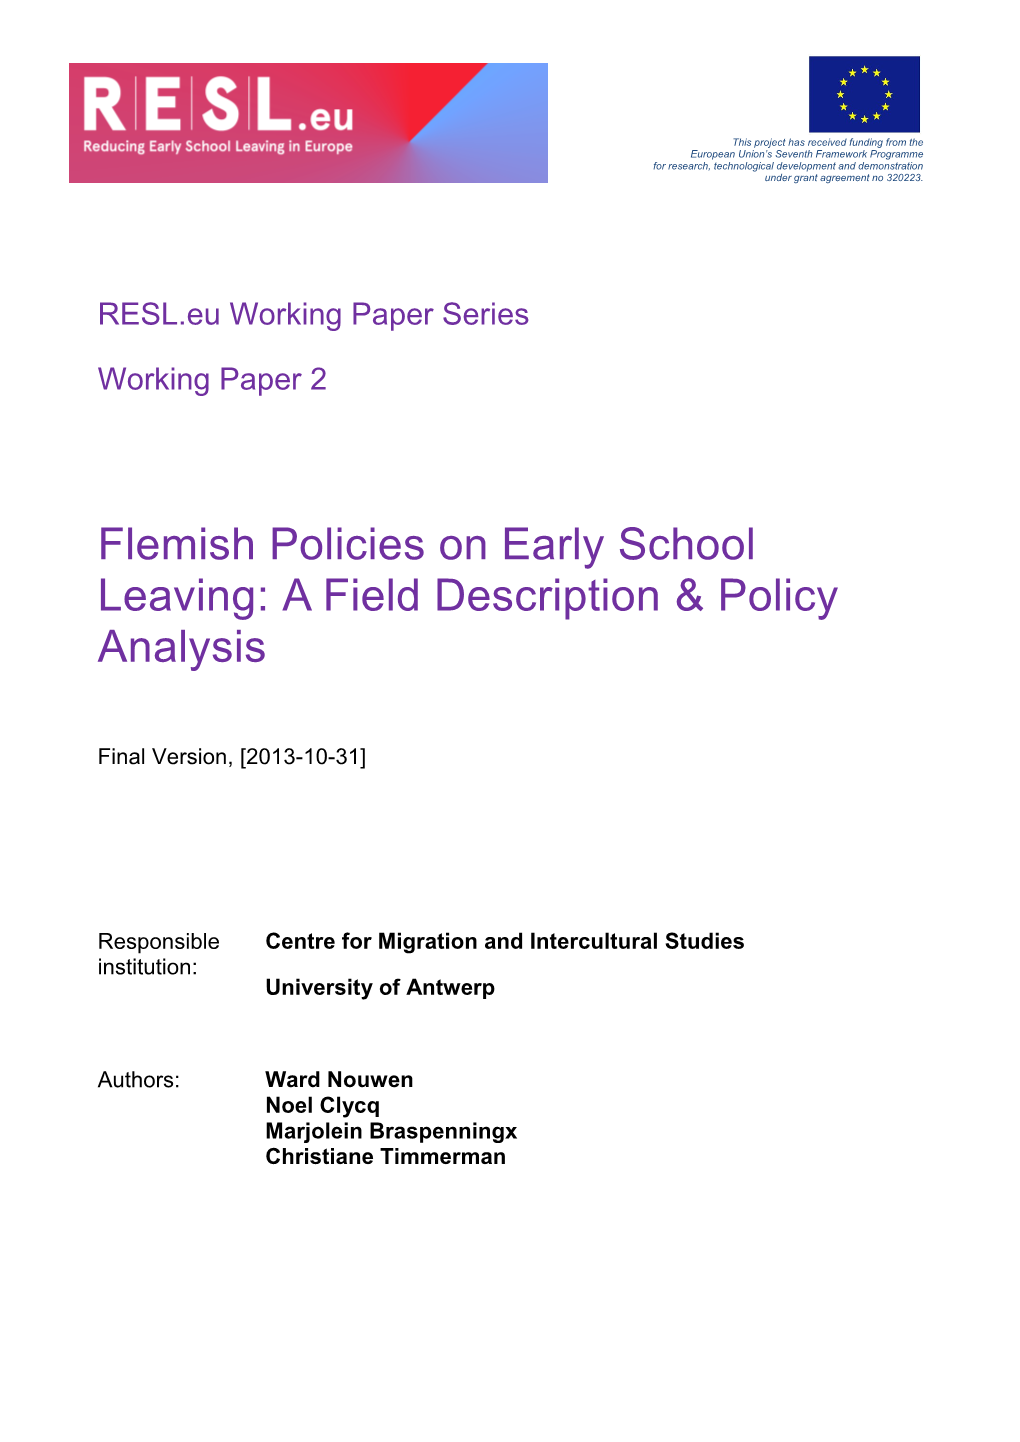 Flemish Policies on Early School Leaving: a Field Description & Policy Analysis